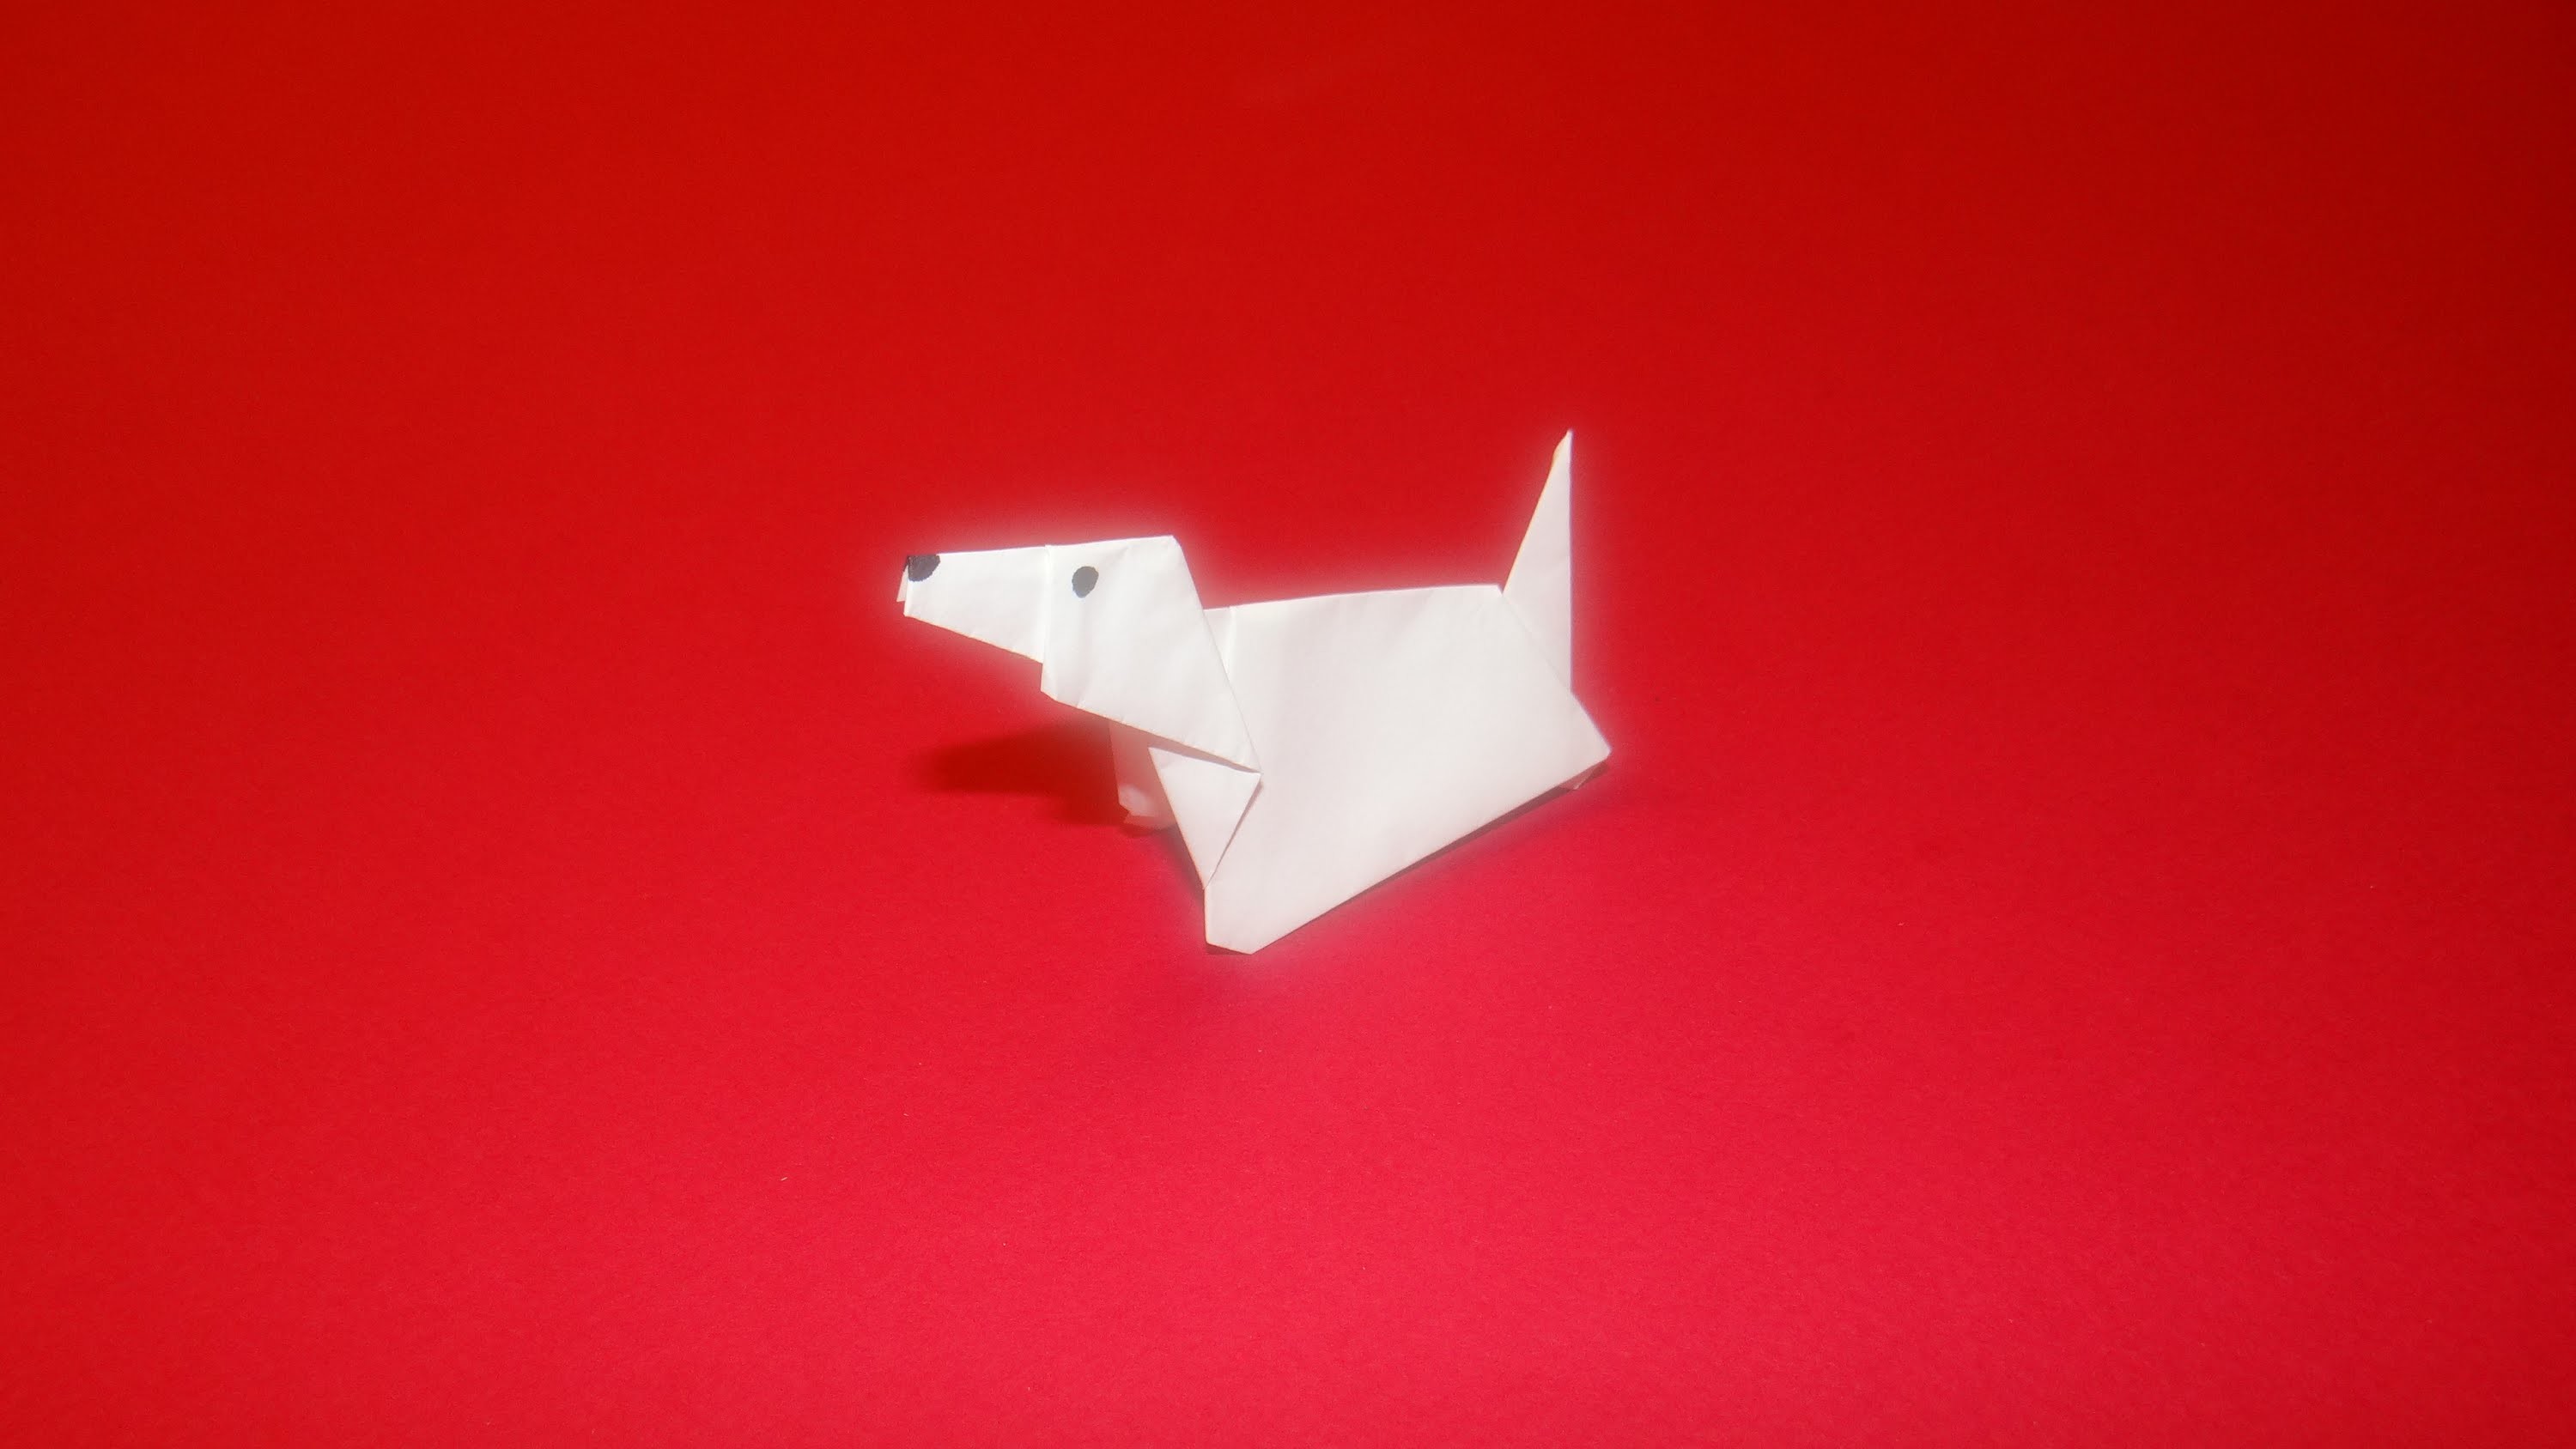 How To Make An Origami Dog 02